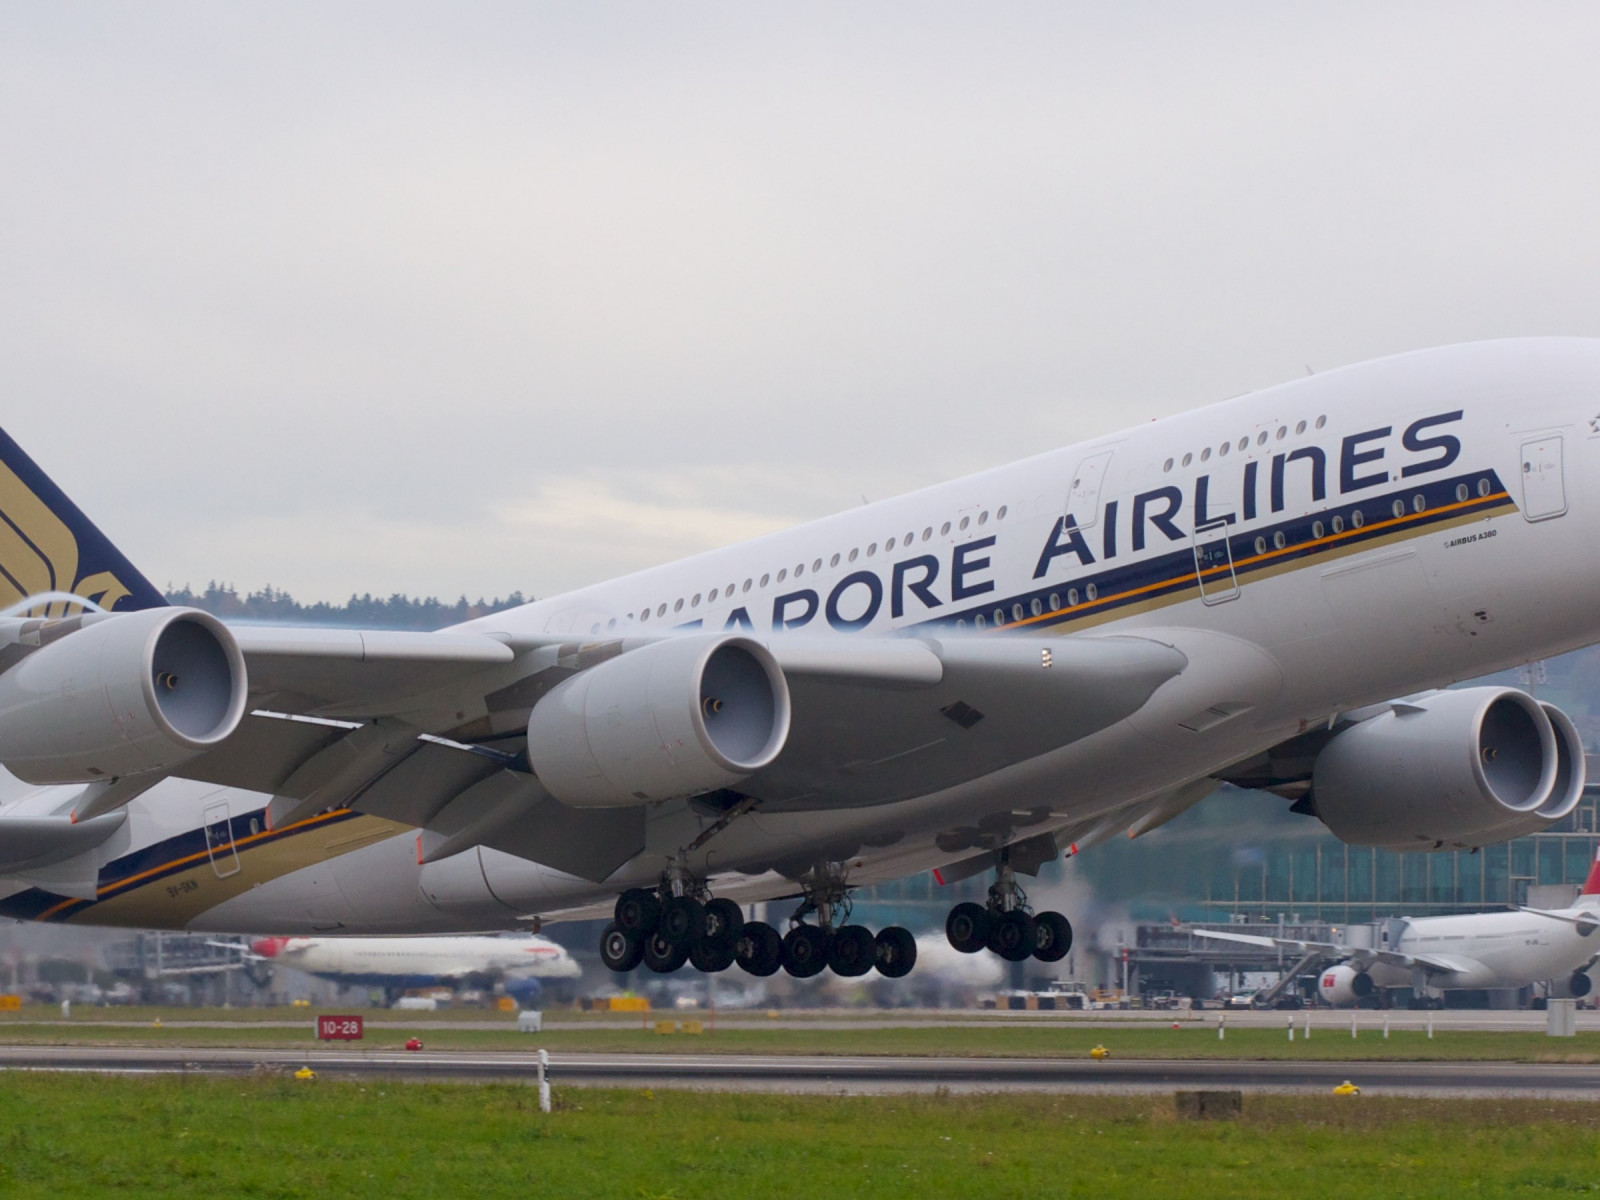 Passenger airplane from Singapore airlines wallpaper 1600x1200